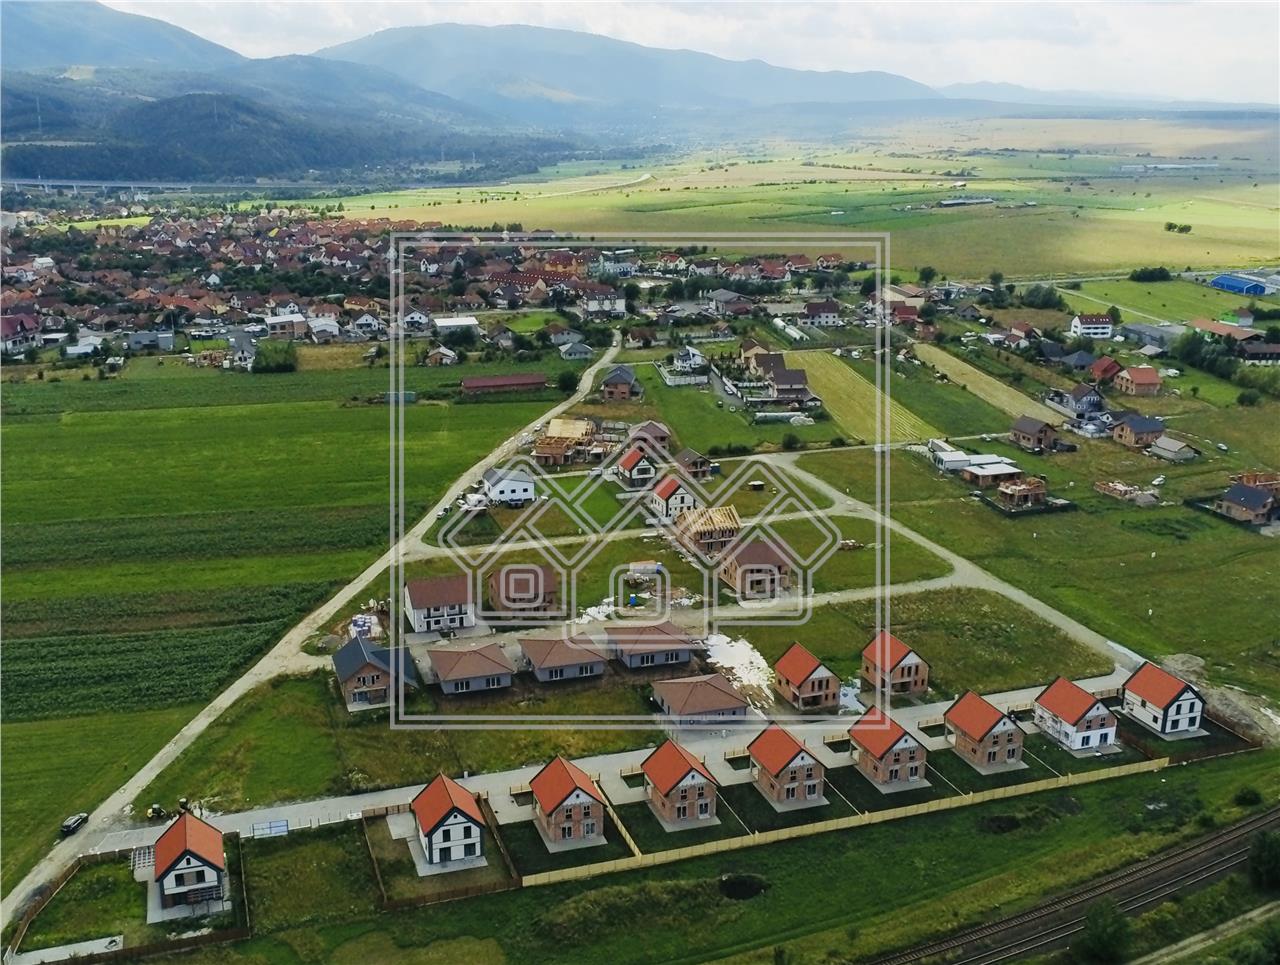 Verdi residential complex - exclusively for houses - Sibiu real estate